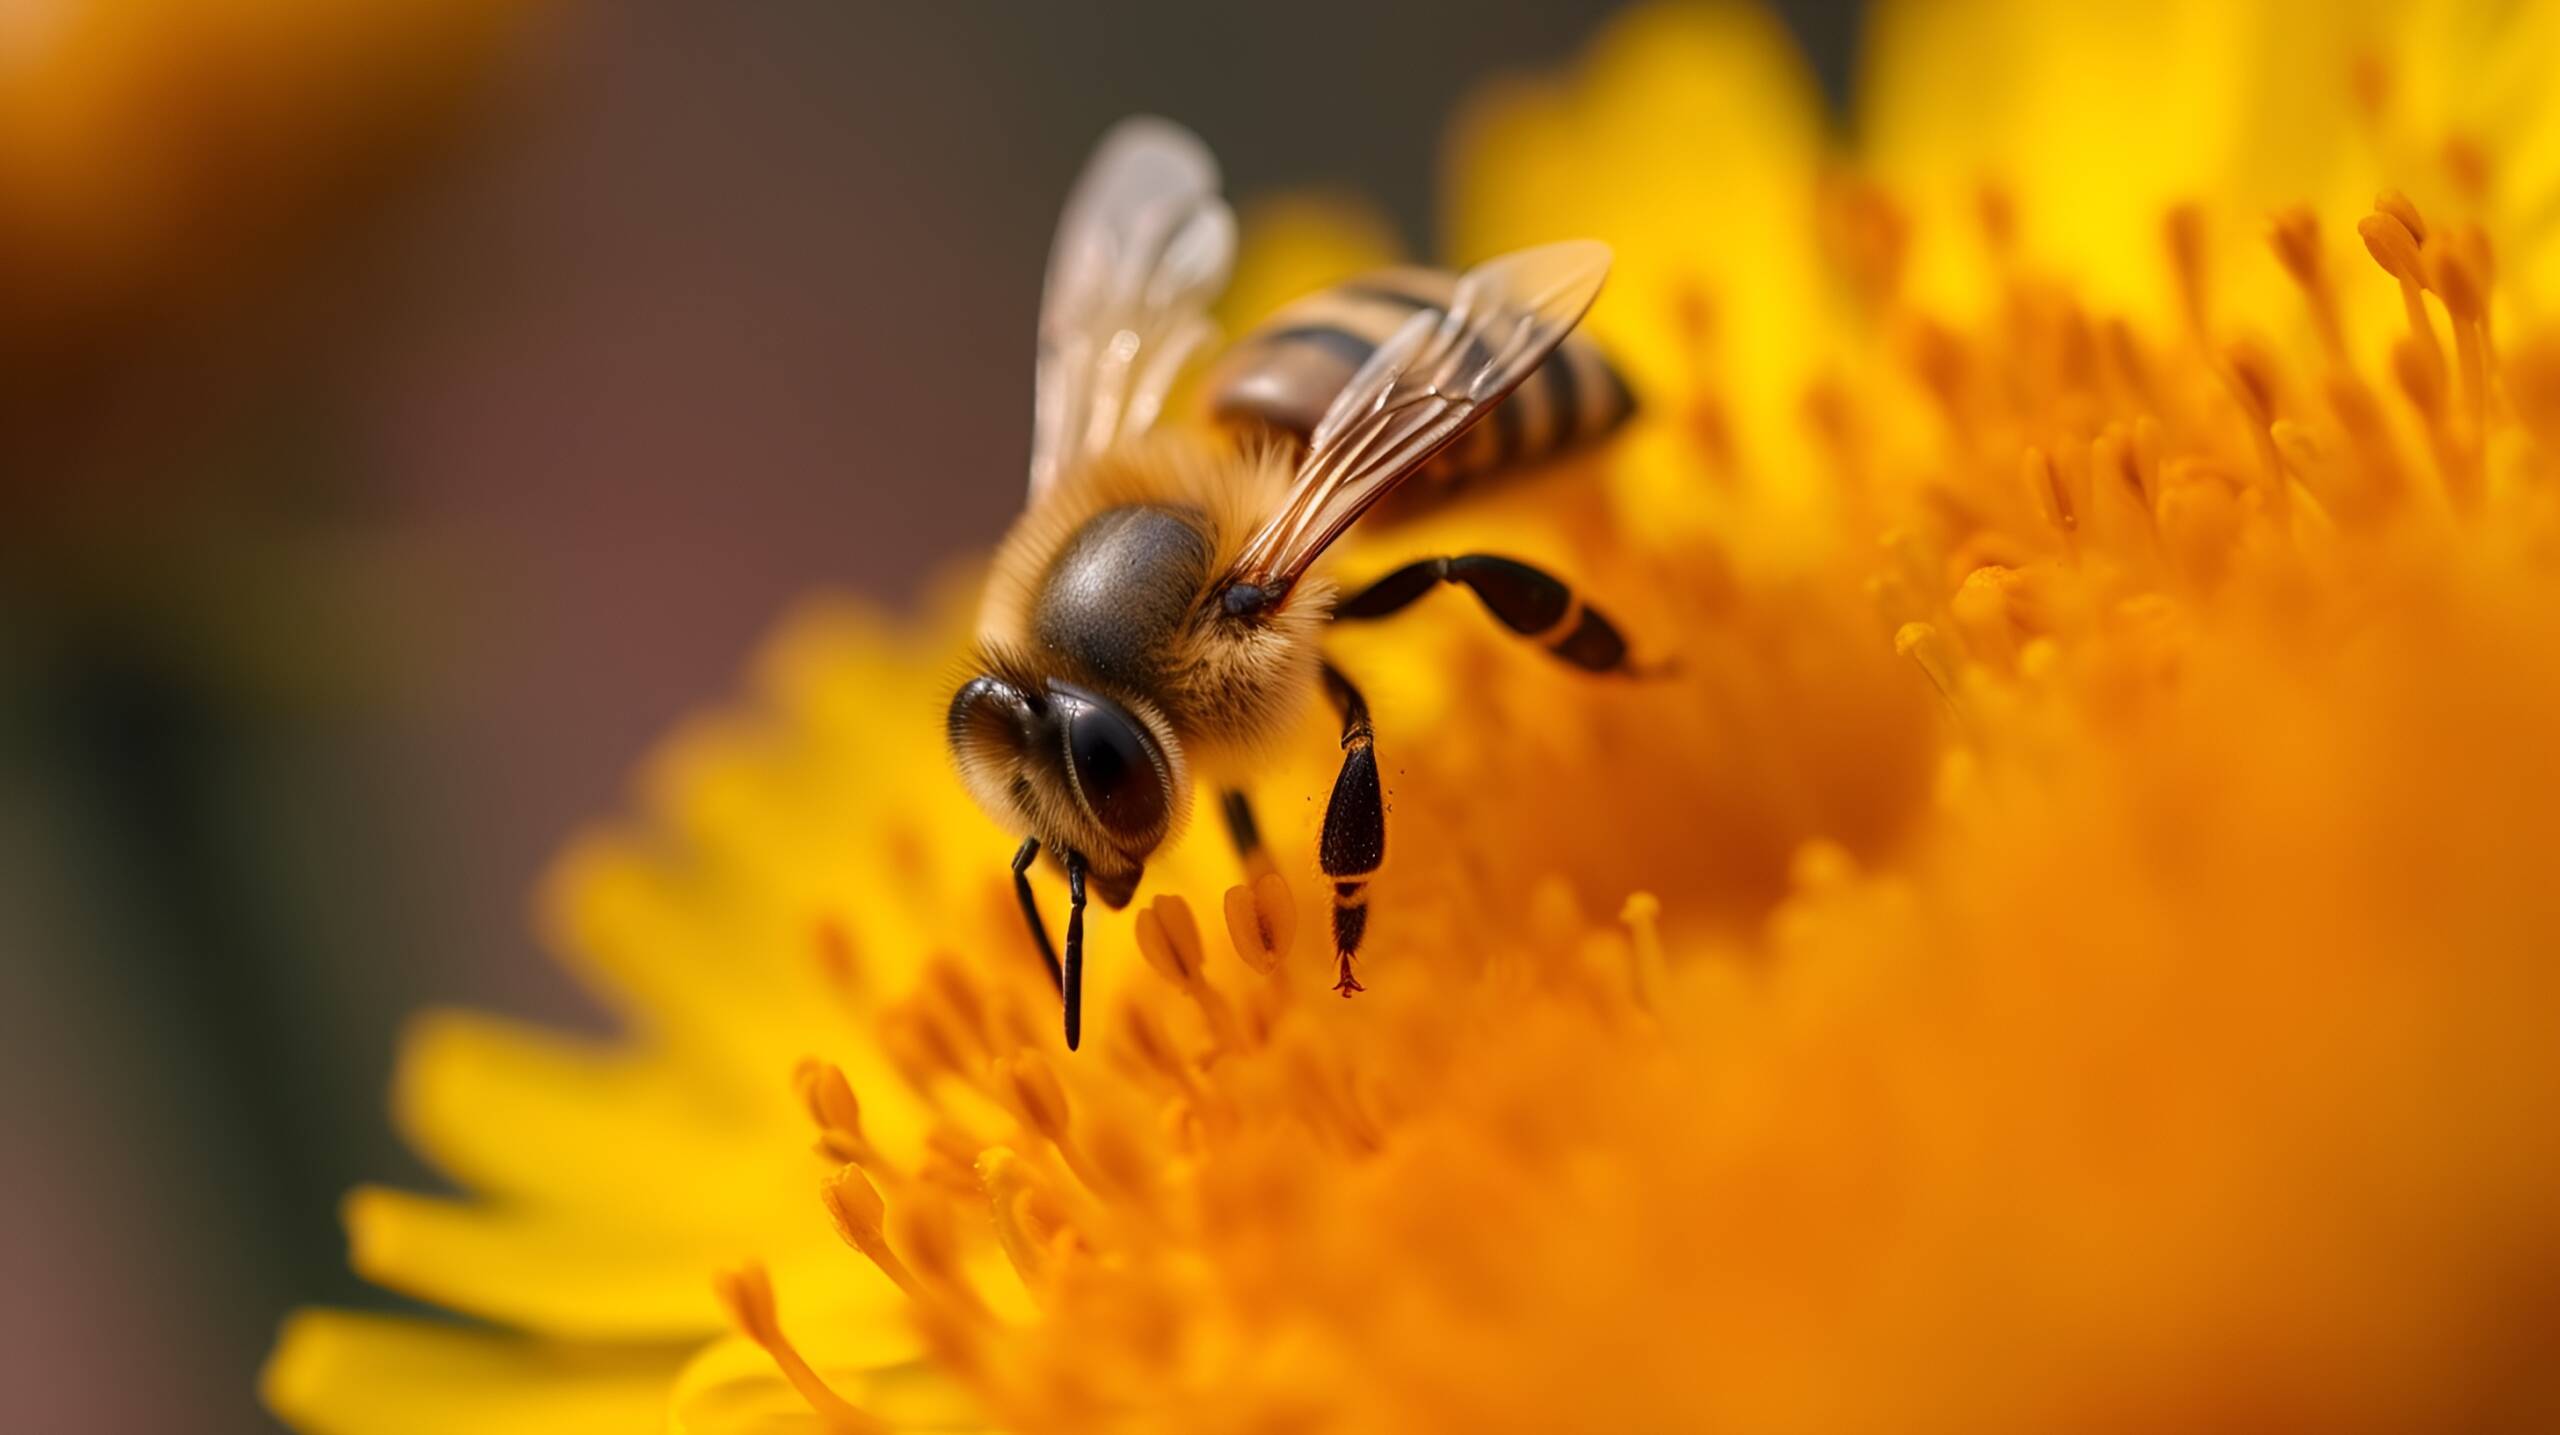 Close-up of bee on a yellow flower.